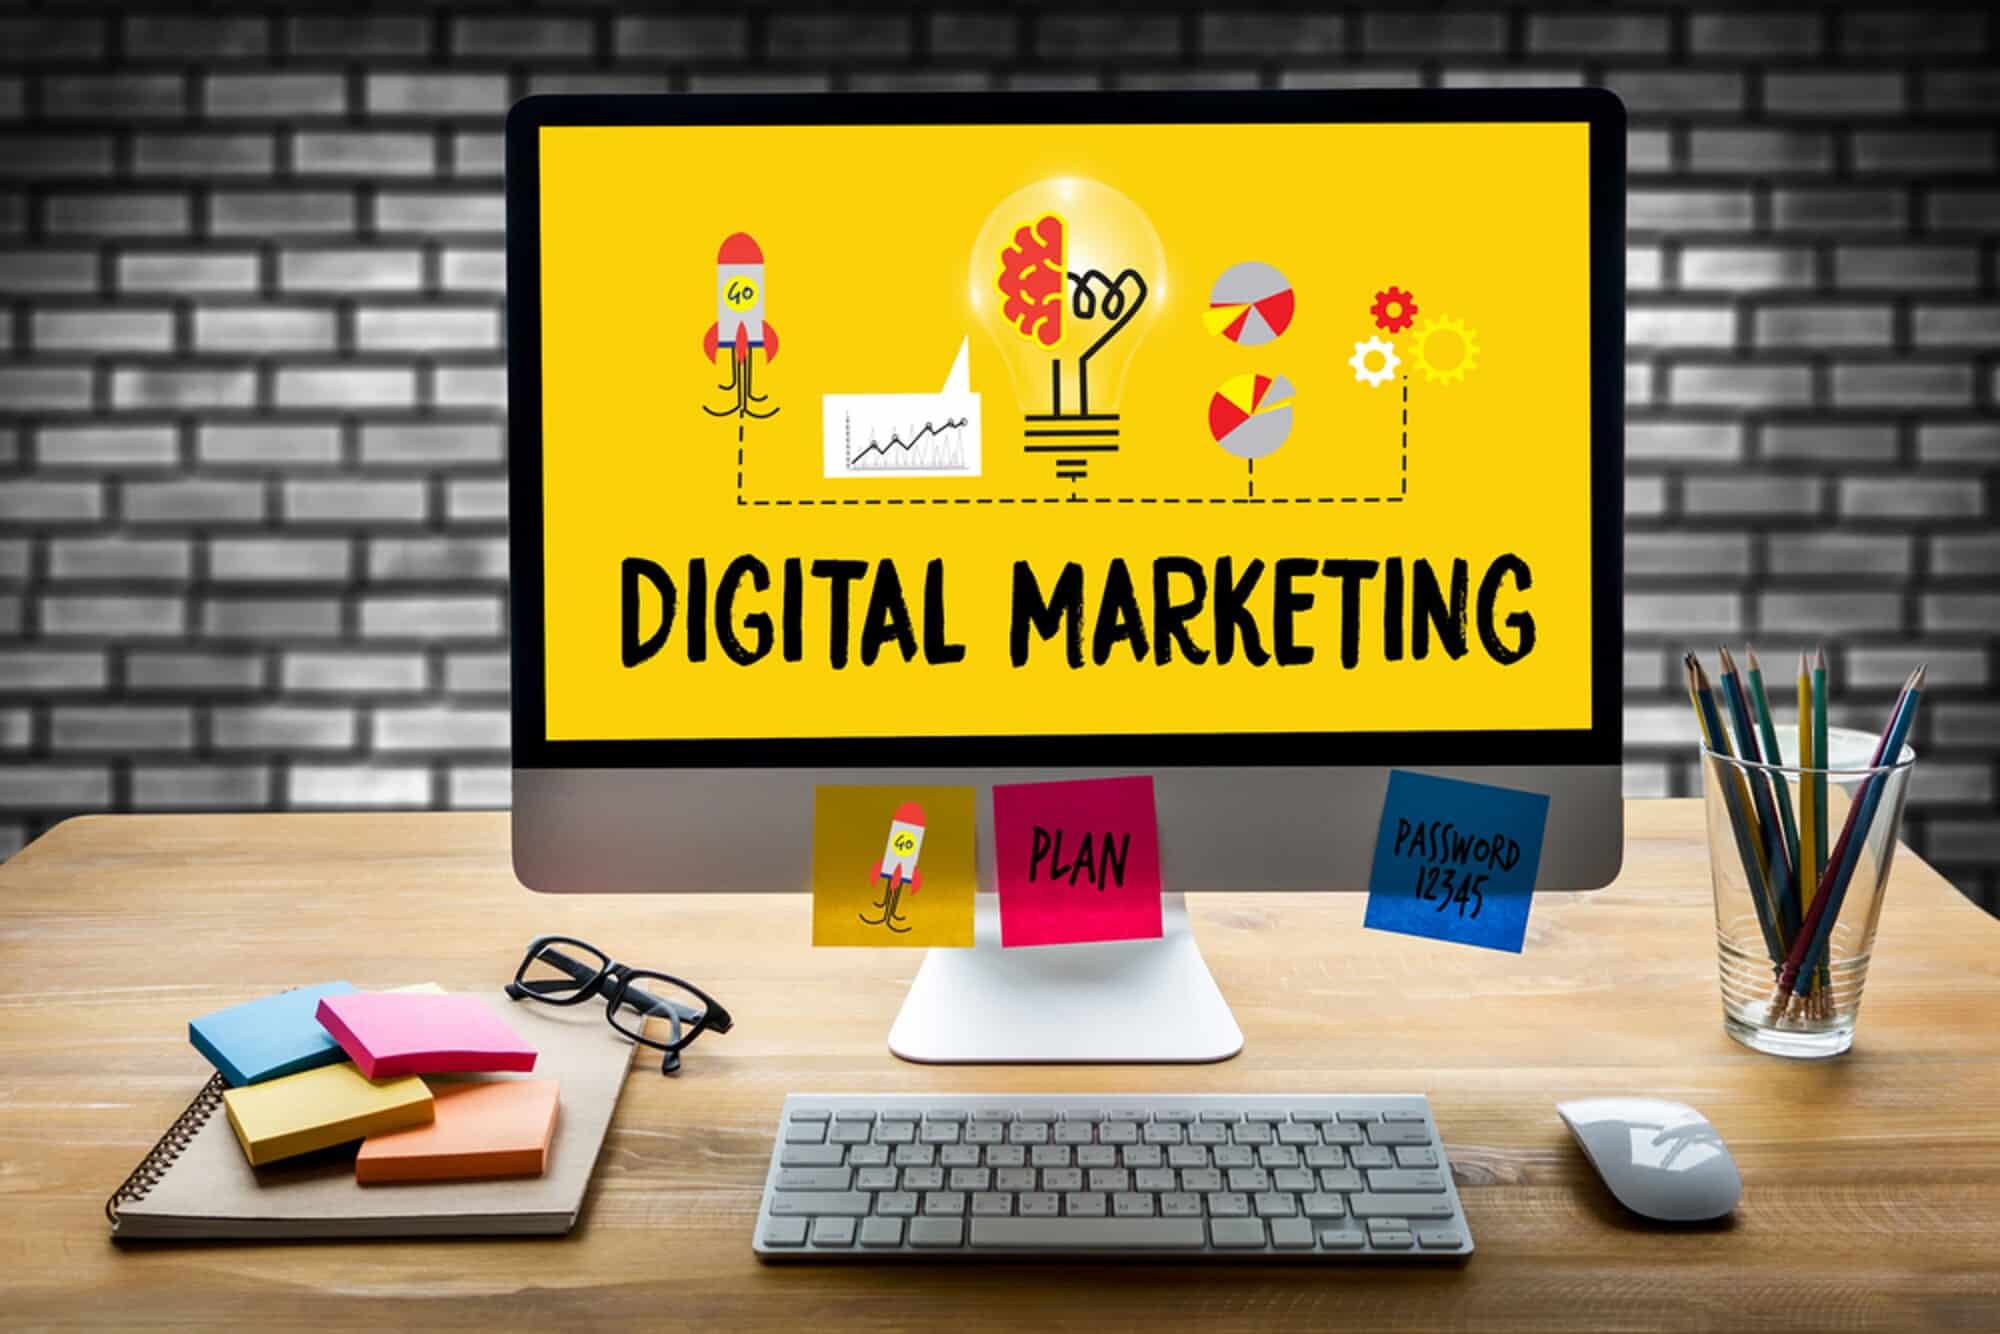 4 Digital Marketing Tips Your Company Should Be Using in 2022